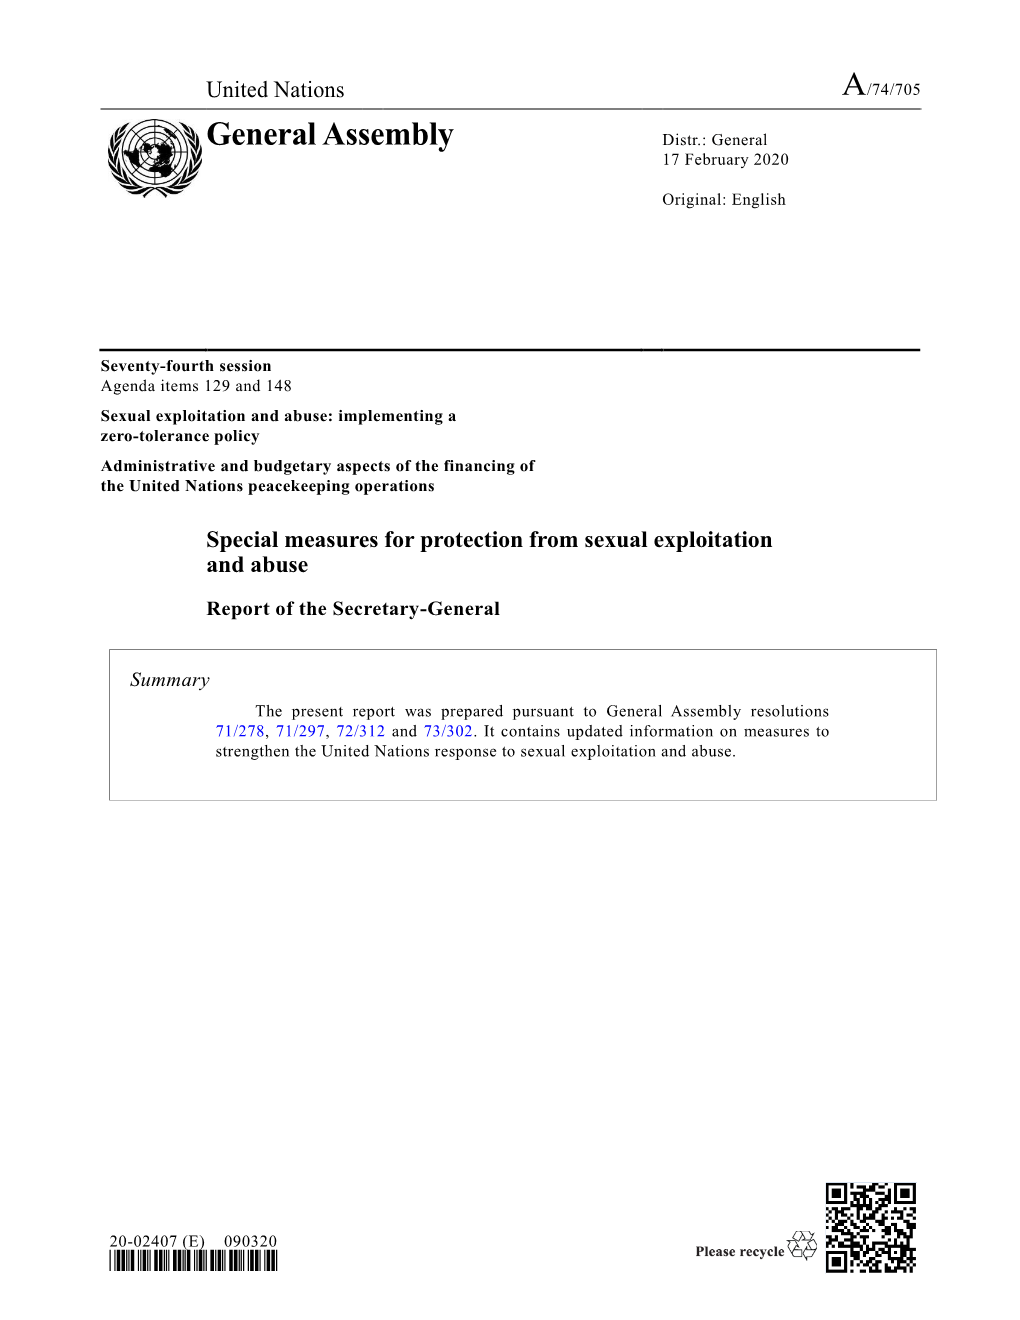 Report of the Secretary-General on Special Measures for Protection